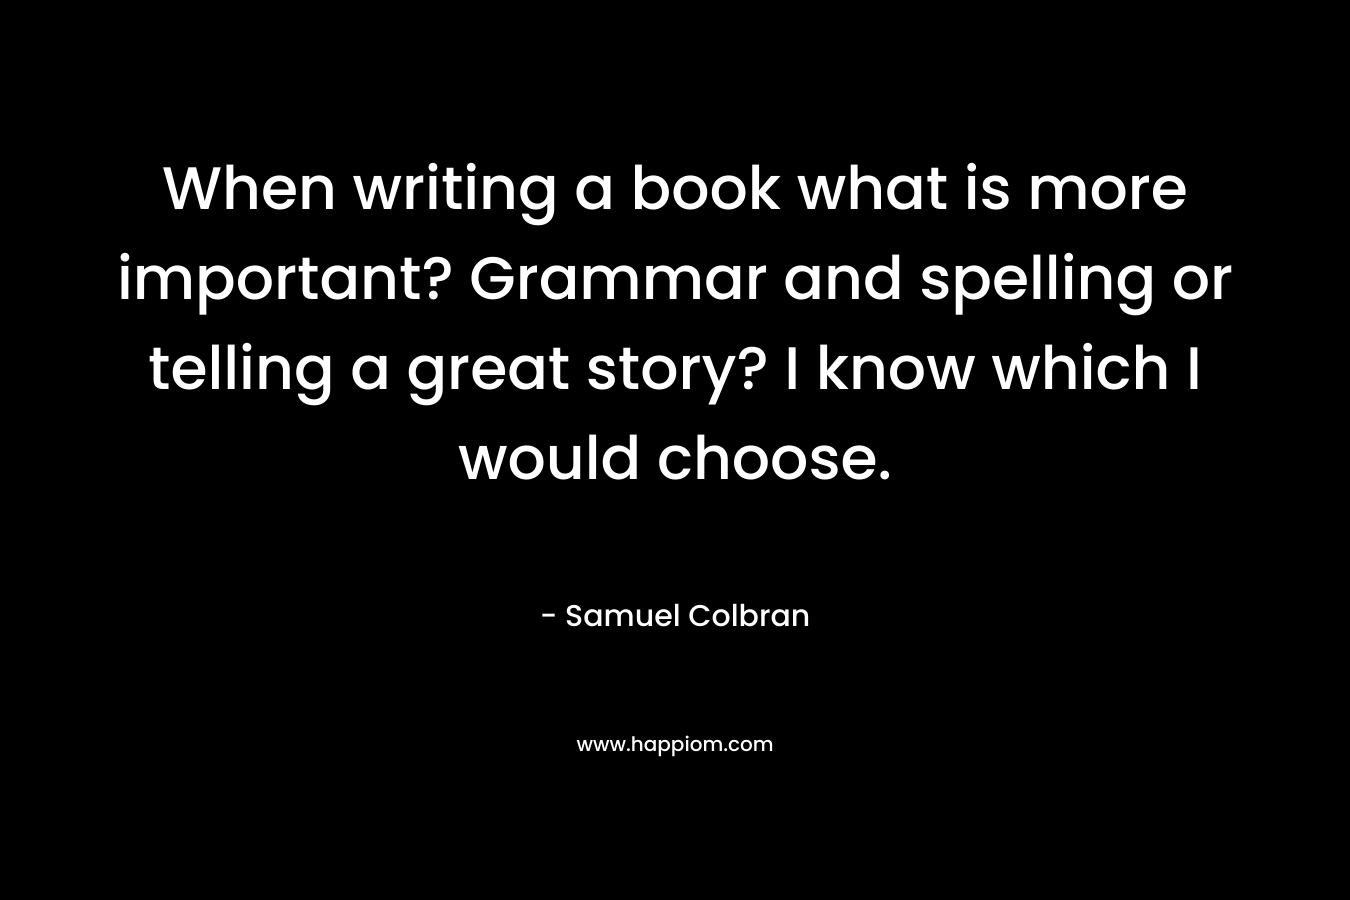 When writing a book what is more important? Grammar and spelling or telling a great story? I know which I would choose. – Samuel Colbran